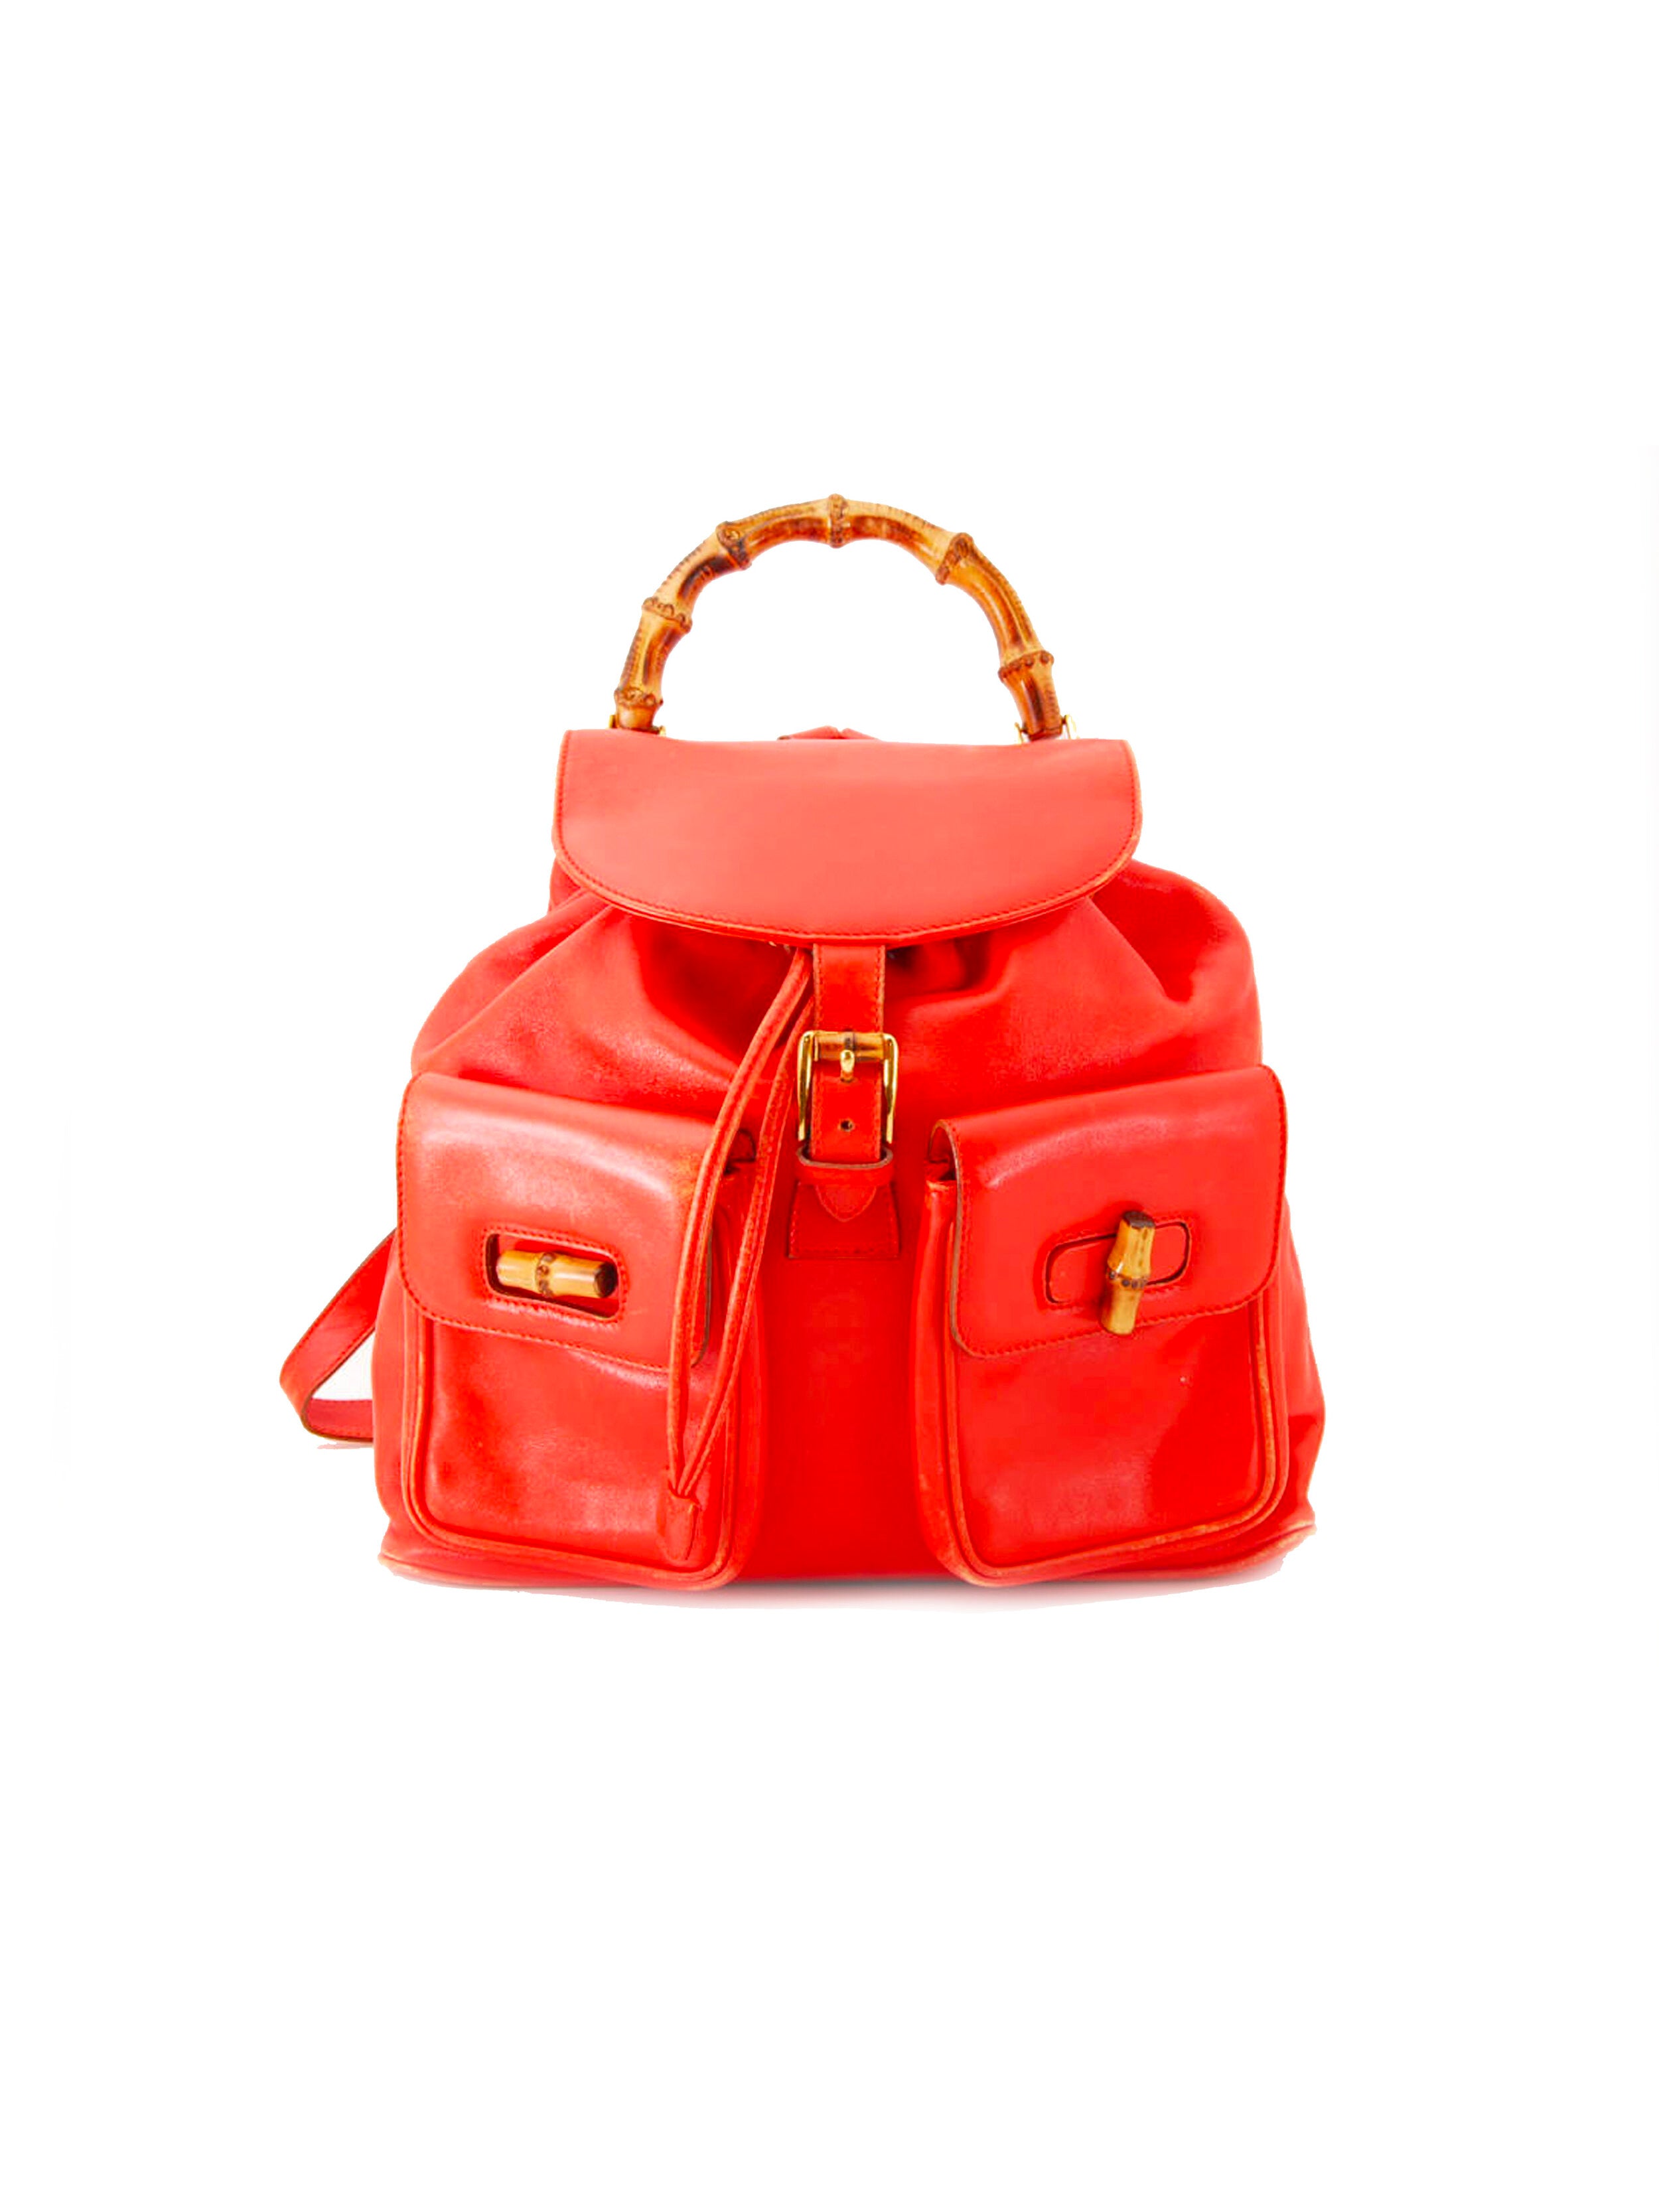 Gucci Bamboo 2000s Orange/Red Leather Backpack